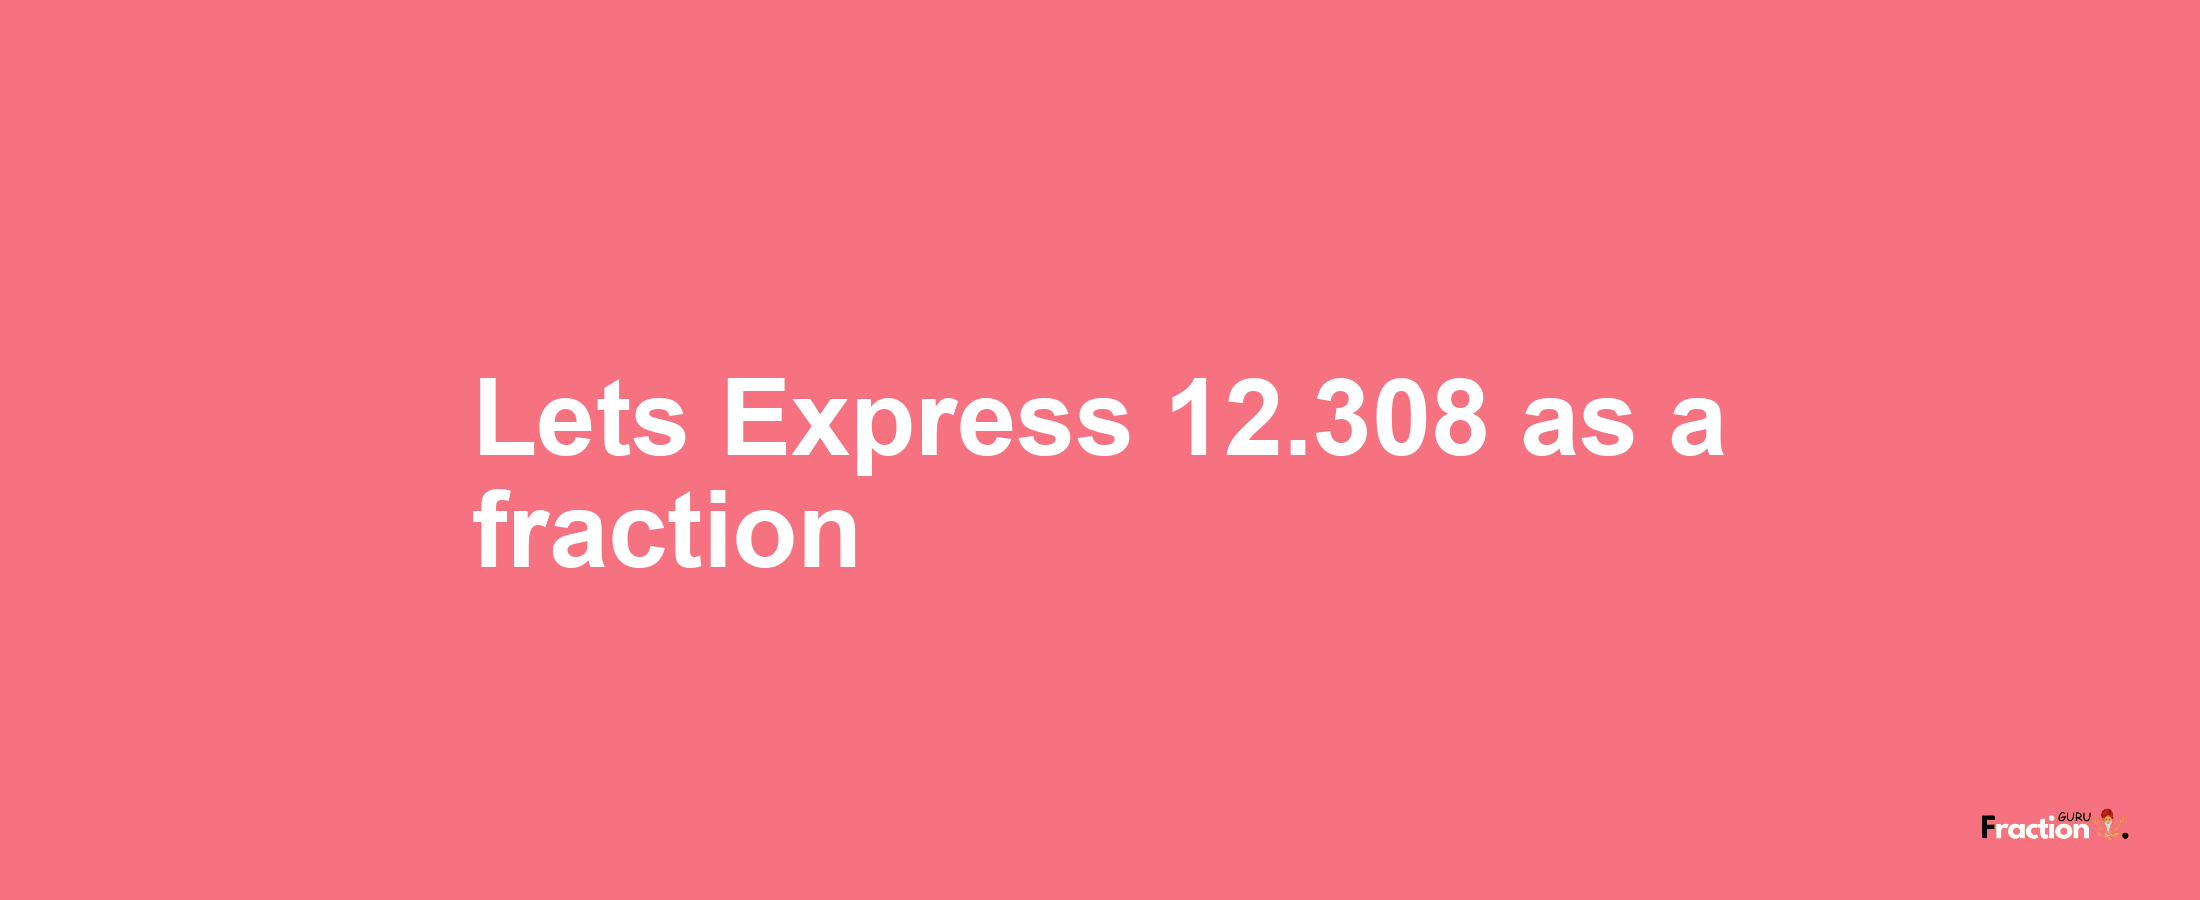 Lets Express 12.308 as afraction